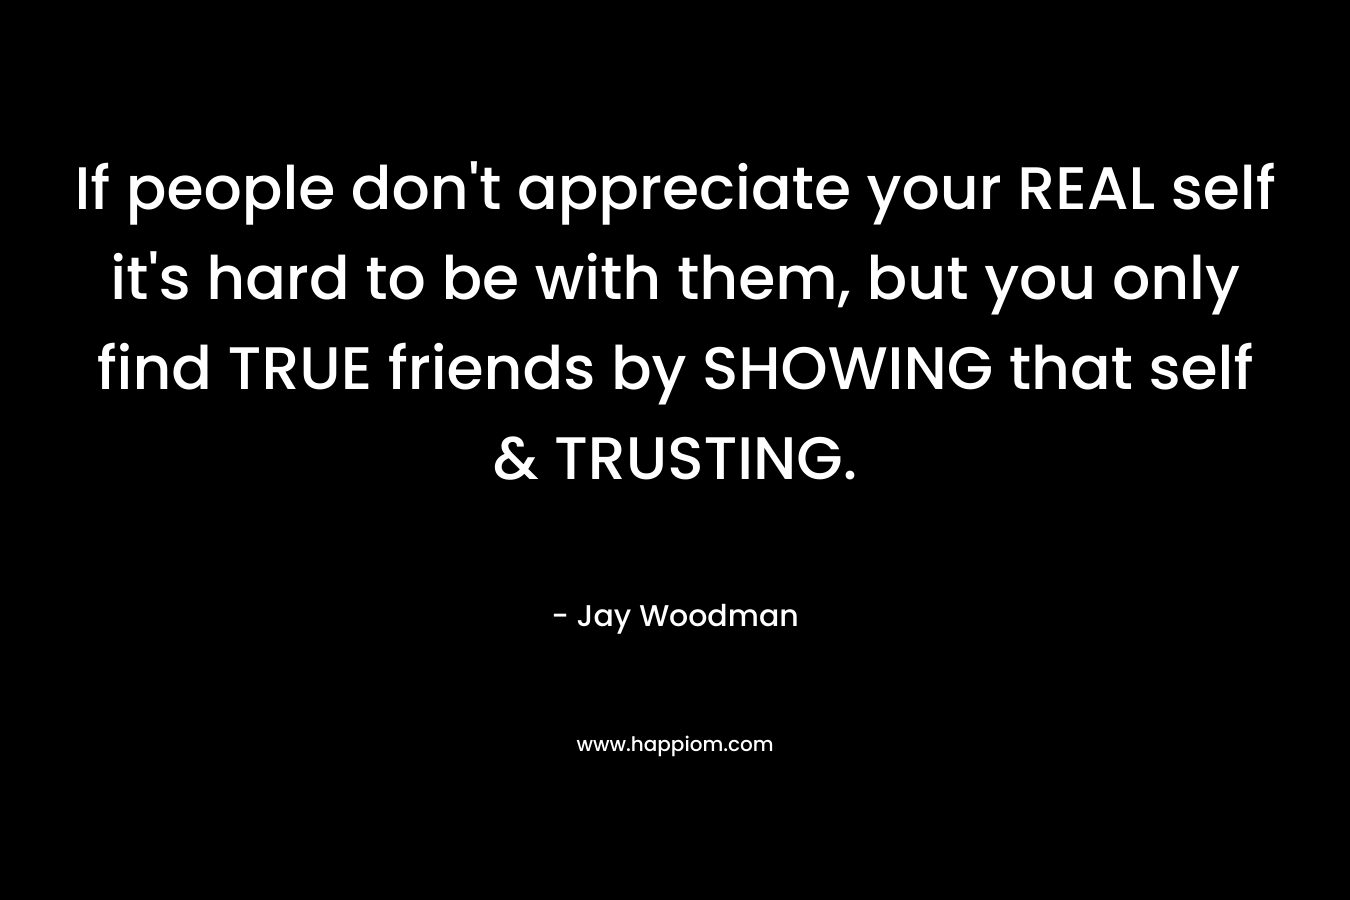 If people don't appreciate your REAL self it's hard to be with them, but you only find TRUE friends by SHOWING that self & TRUSTING.